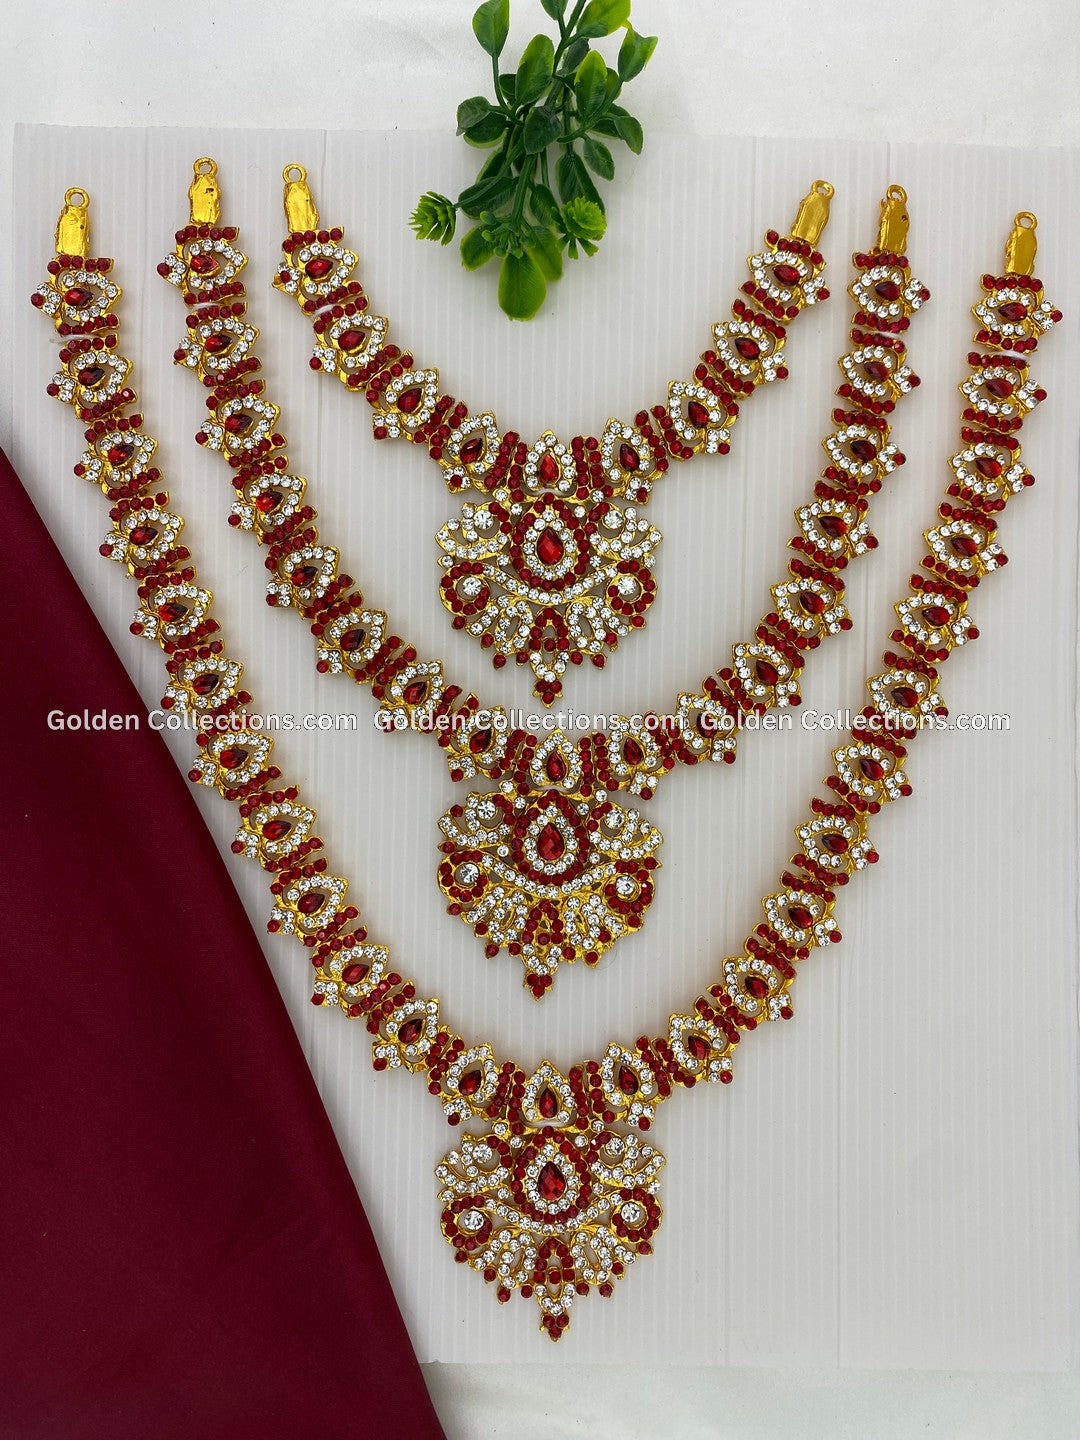 Striking Accents - Jewellery for God Statues - GoldenCollections